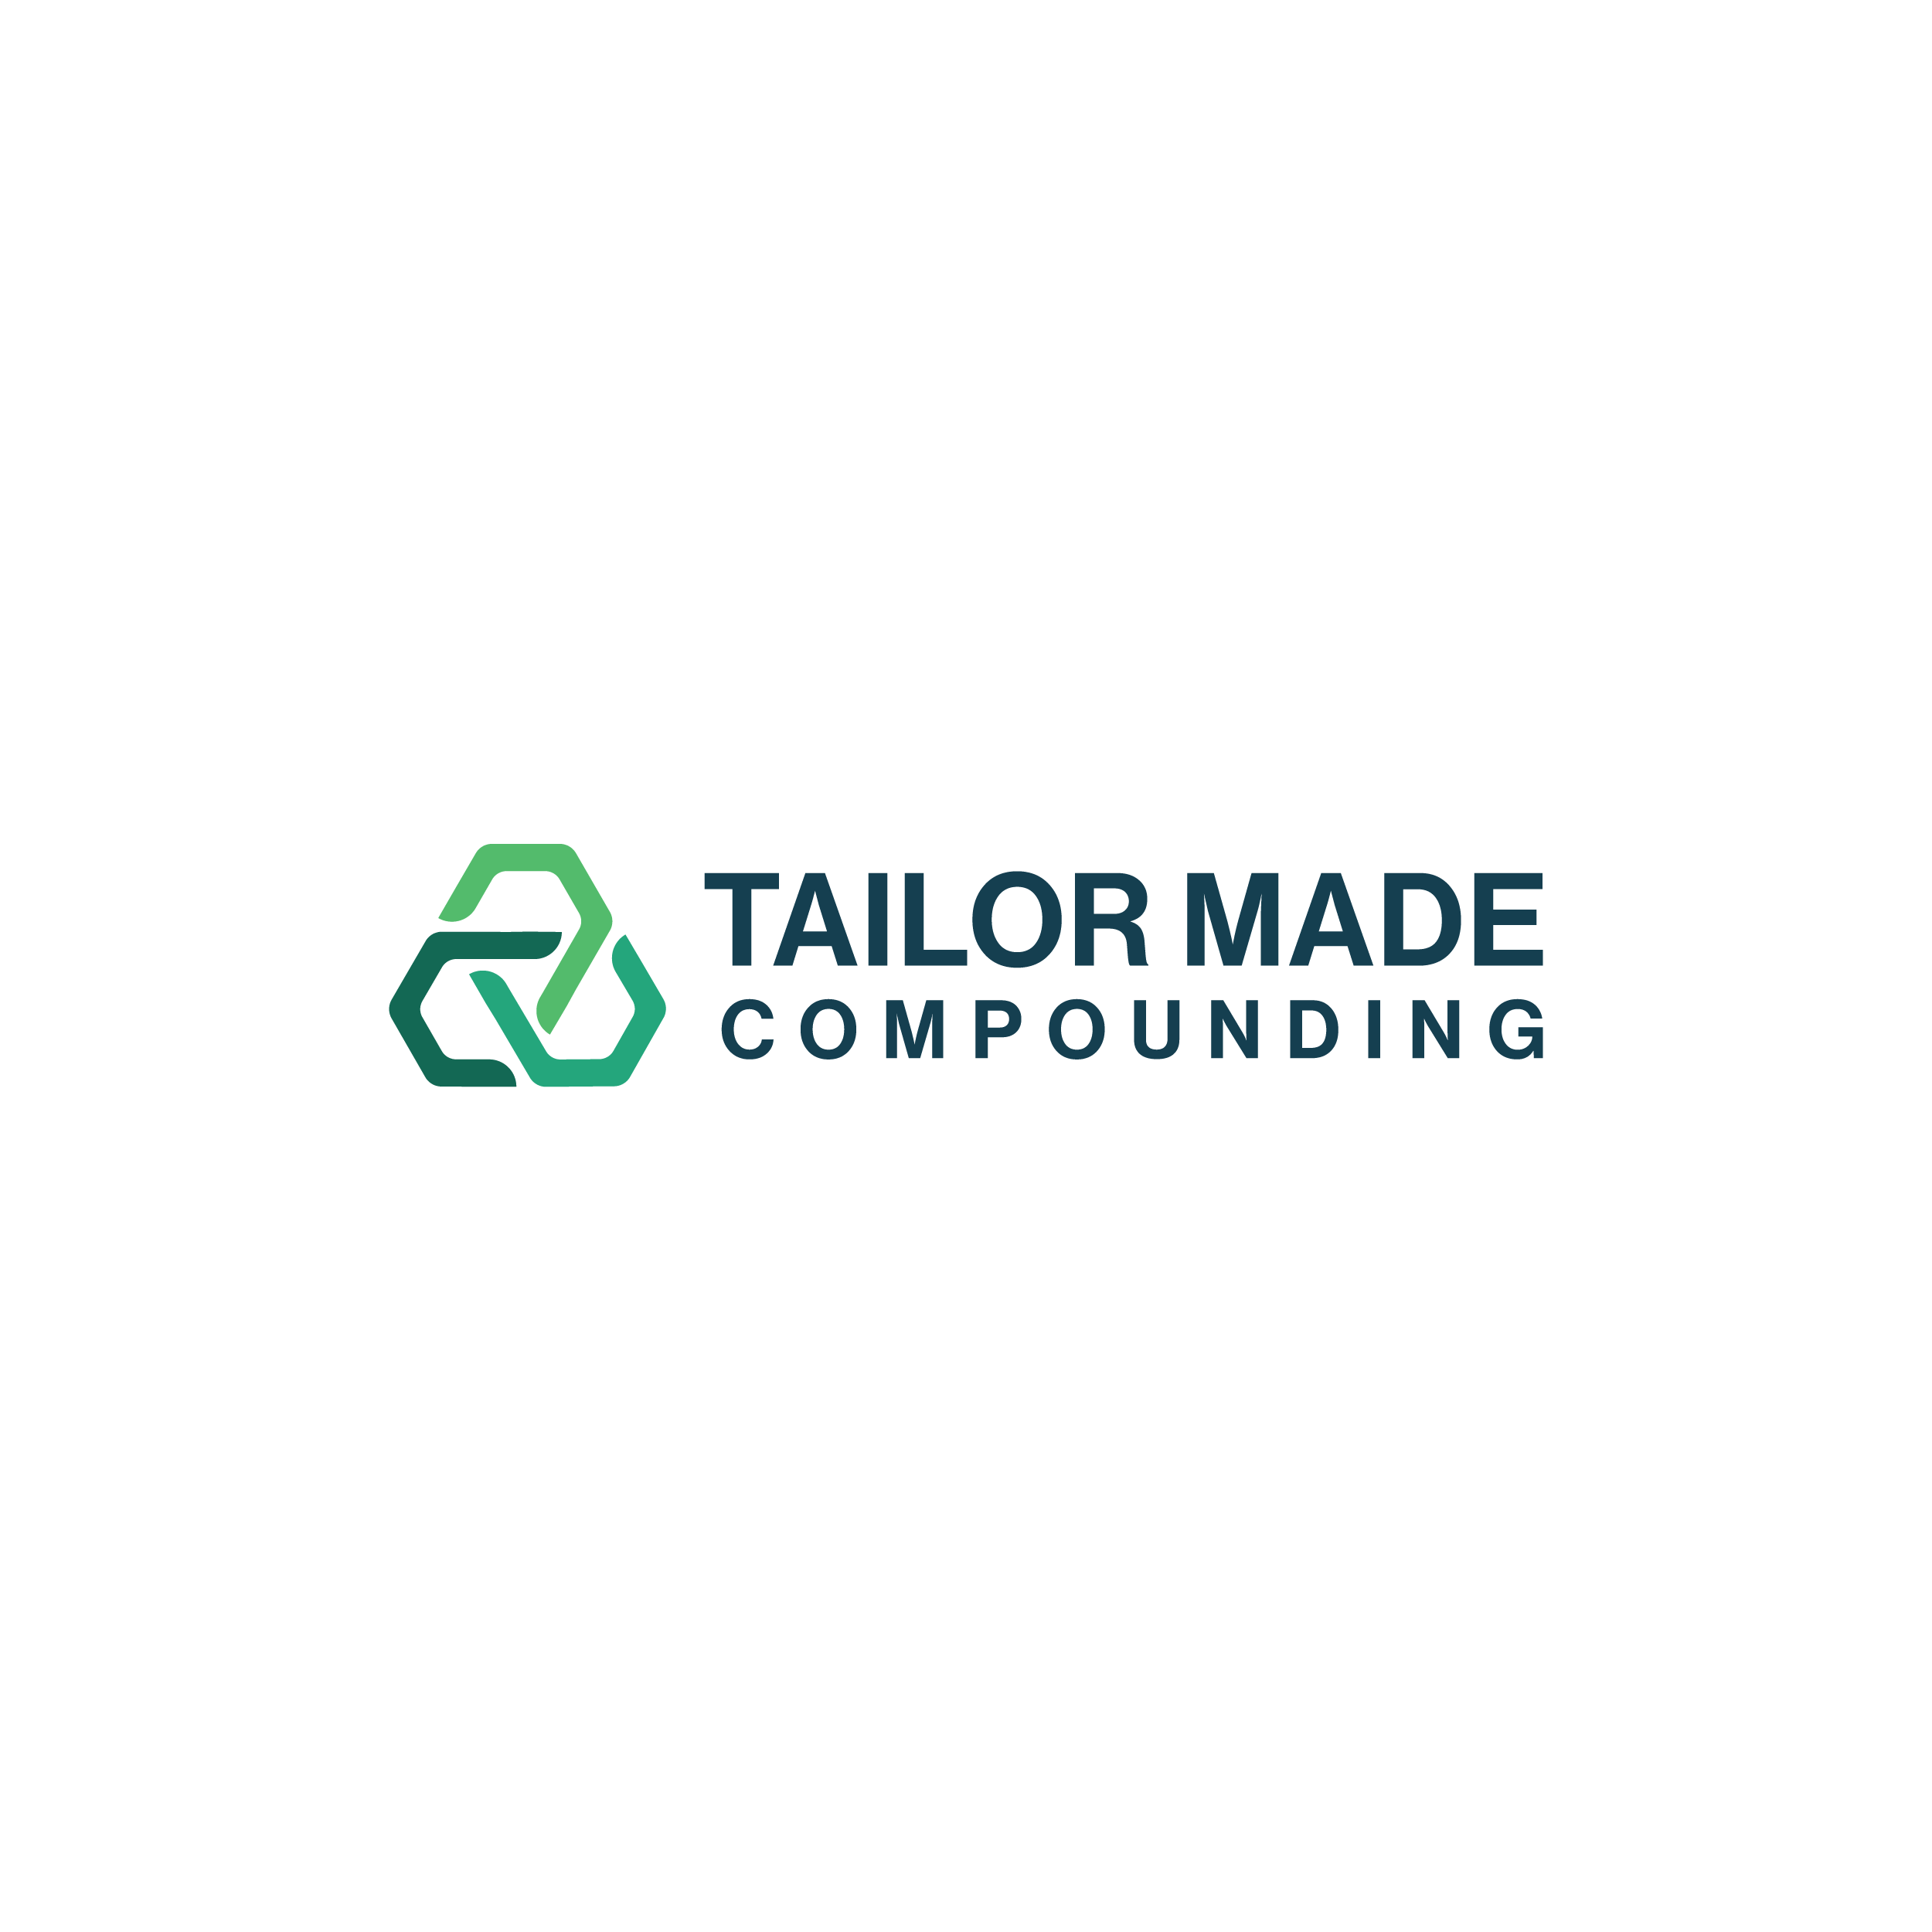 Logo for Tailormade Compounding